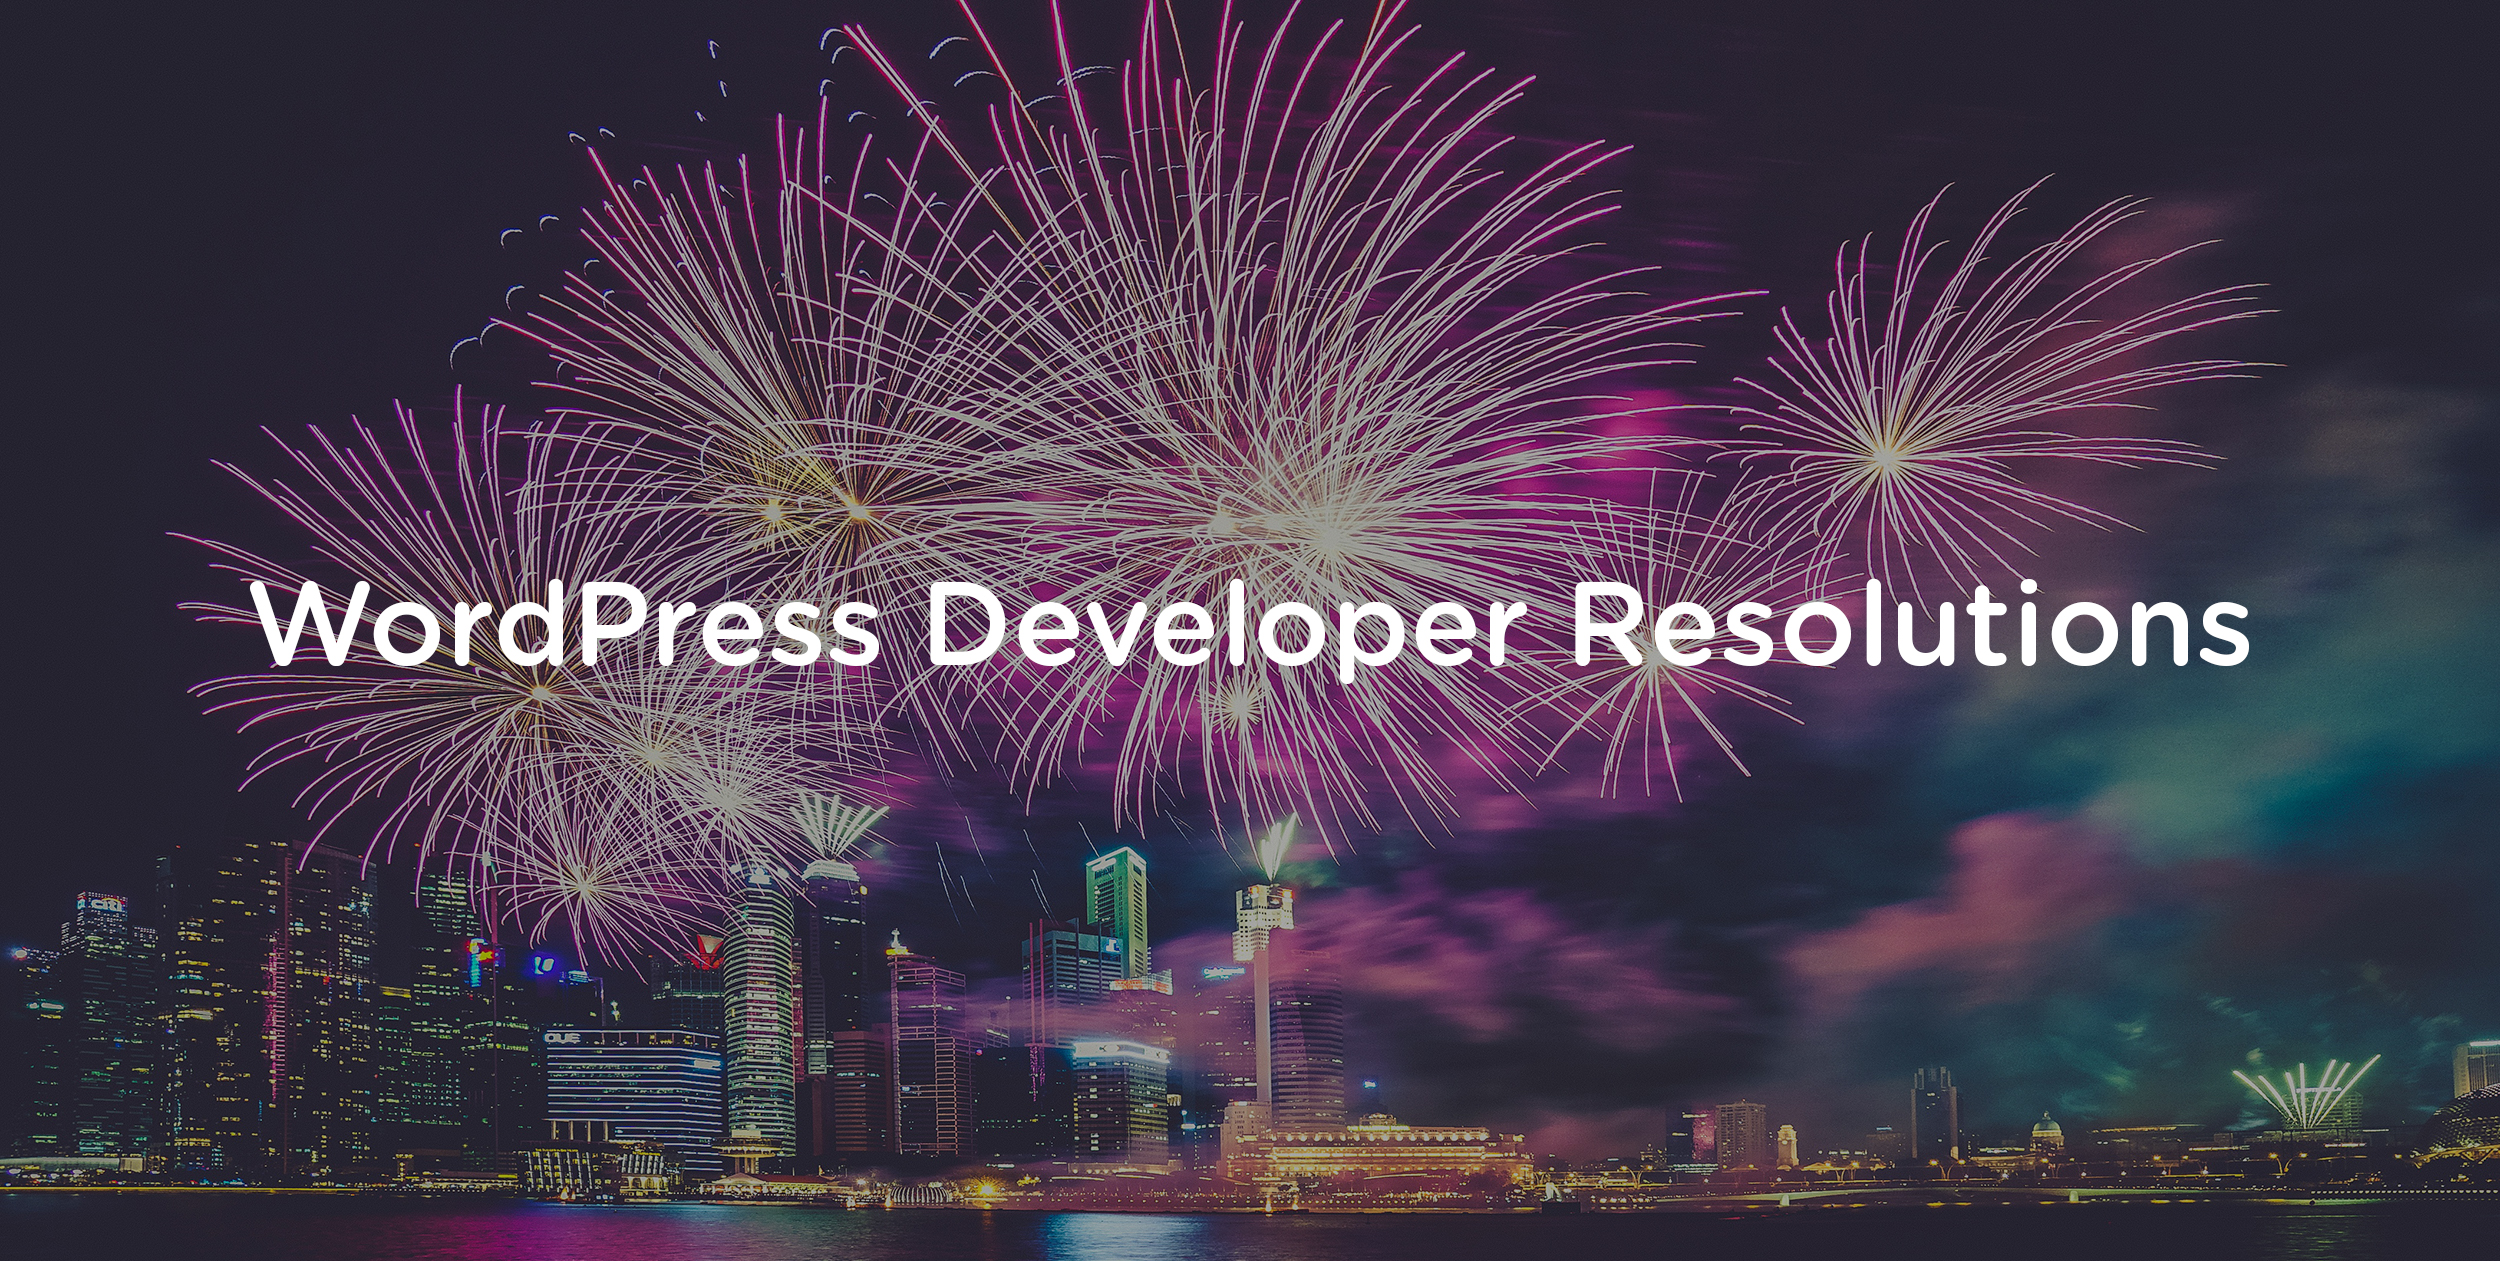 New Year’s resolutions for WordPress developers